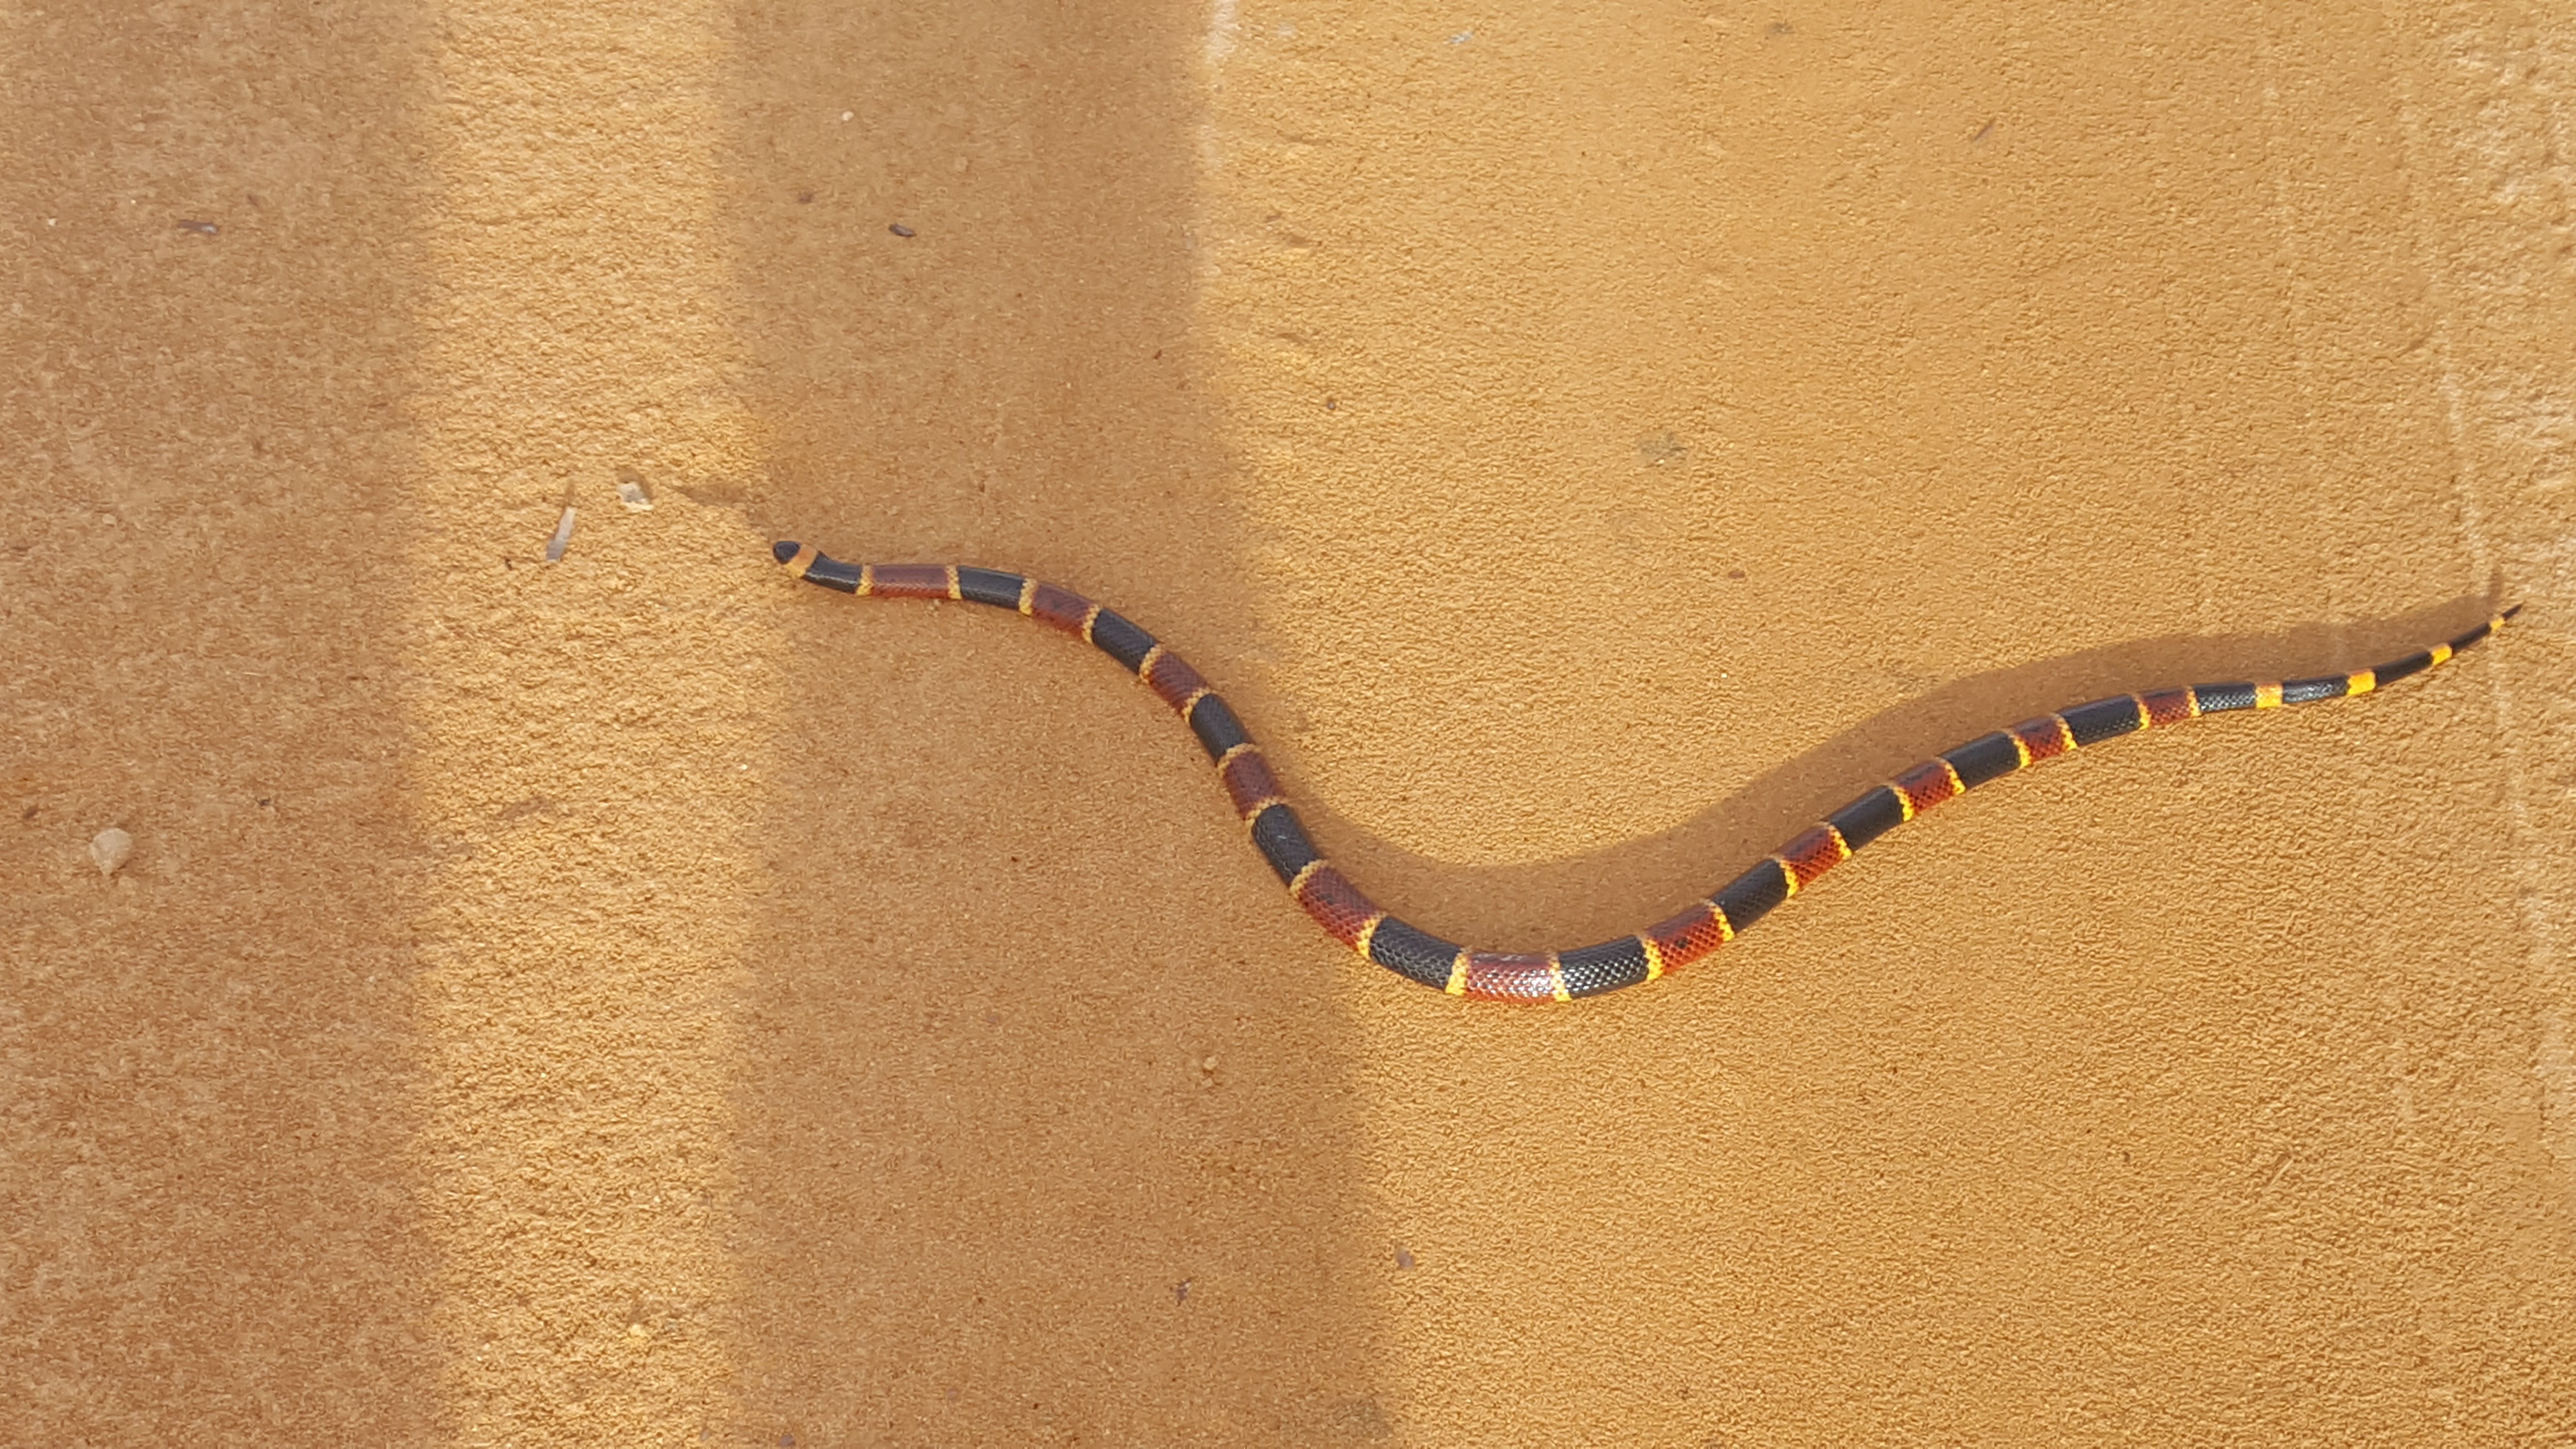 coral snake mouth